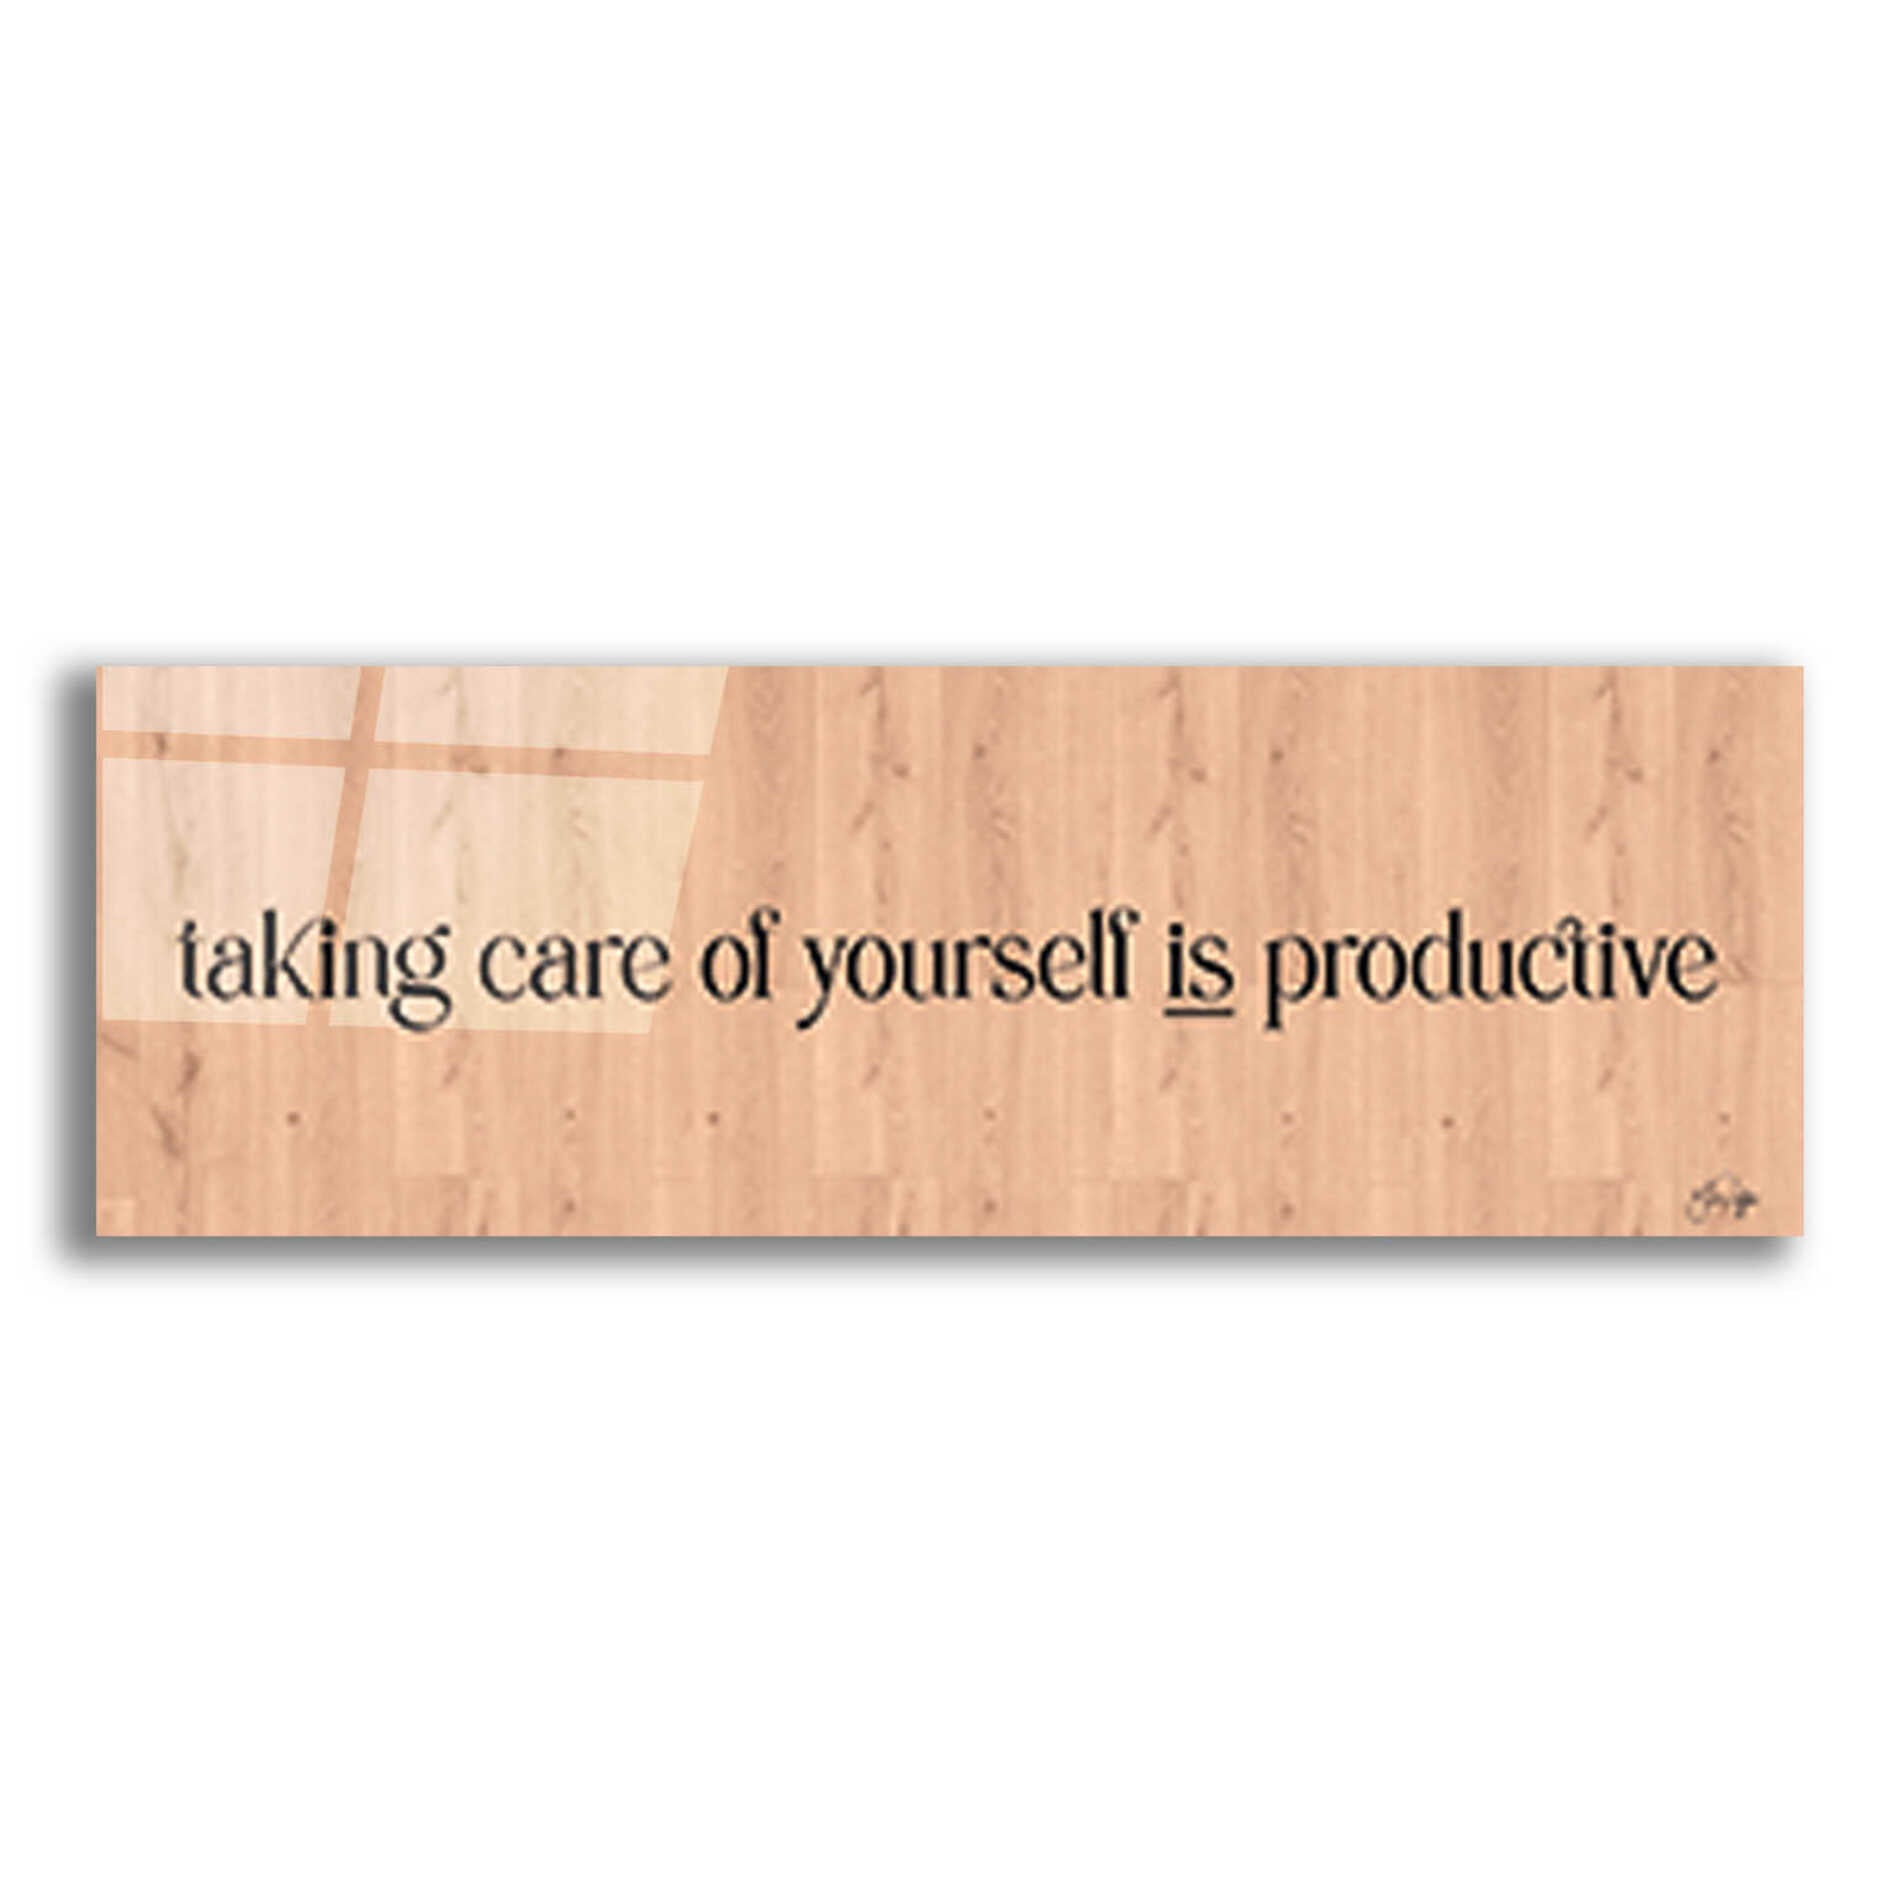 Epic Art 'Taking Care of Yourself is Productive' by Yass Naffas Designs, Acrylic Glass Wall Art